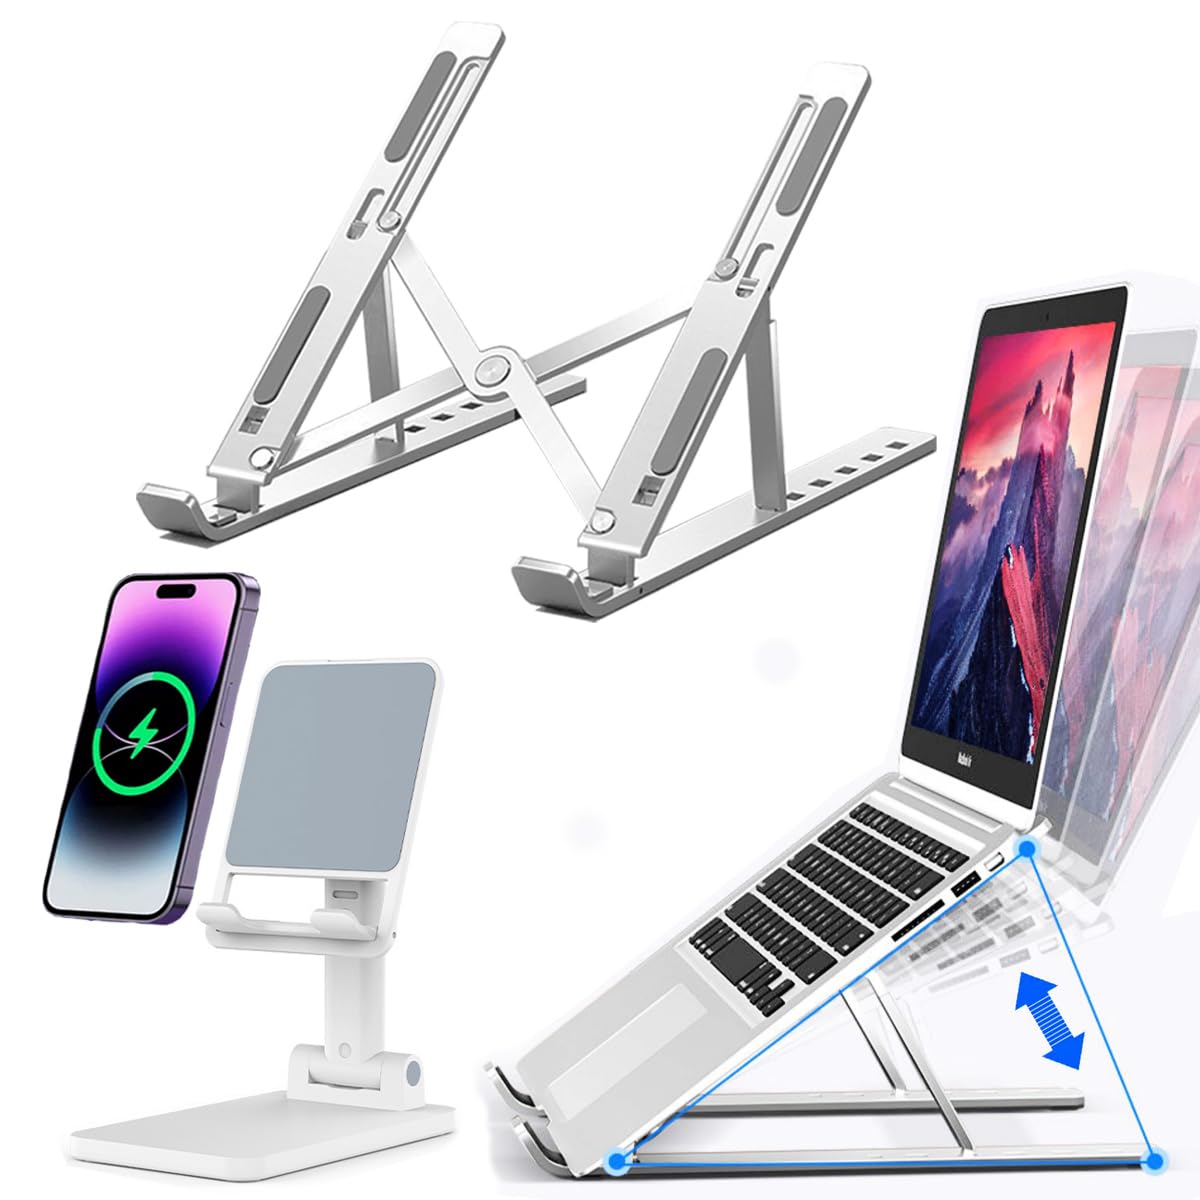 KLAQQED Laptop Stand for Desk, Aluminum Portable Laptop Stand, Phone Stand Holder, Foldable Tablet Notebook Stand for iPad MacBook Stand, Adjustable Height Laptop Stand for Office Desk Accessories